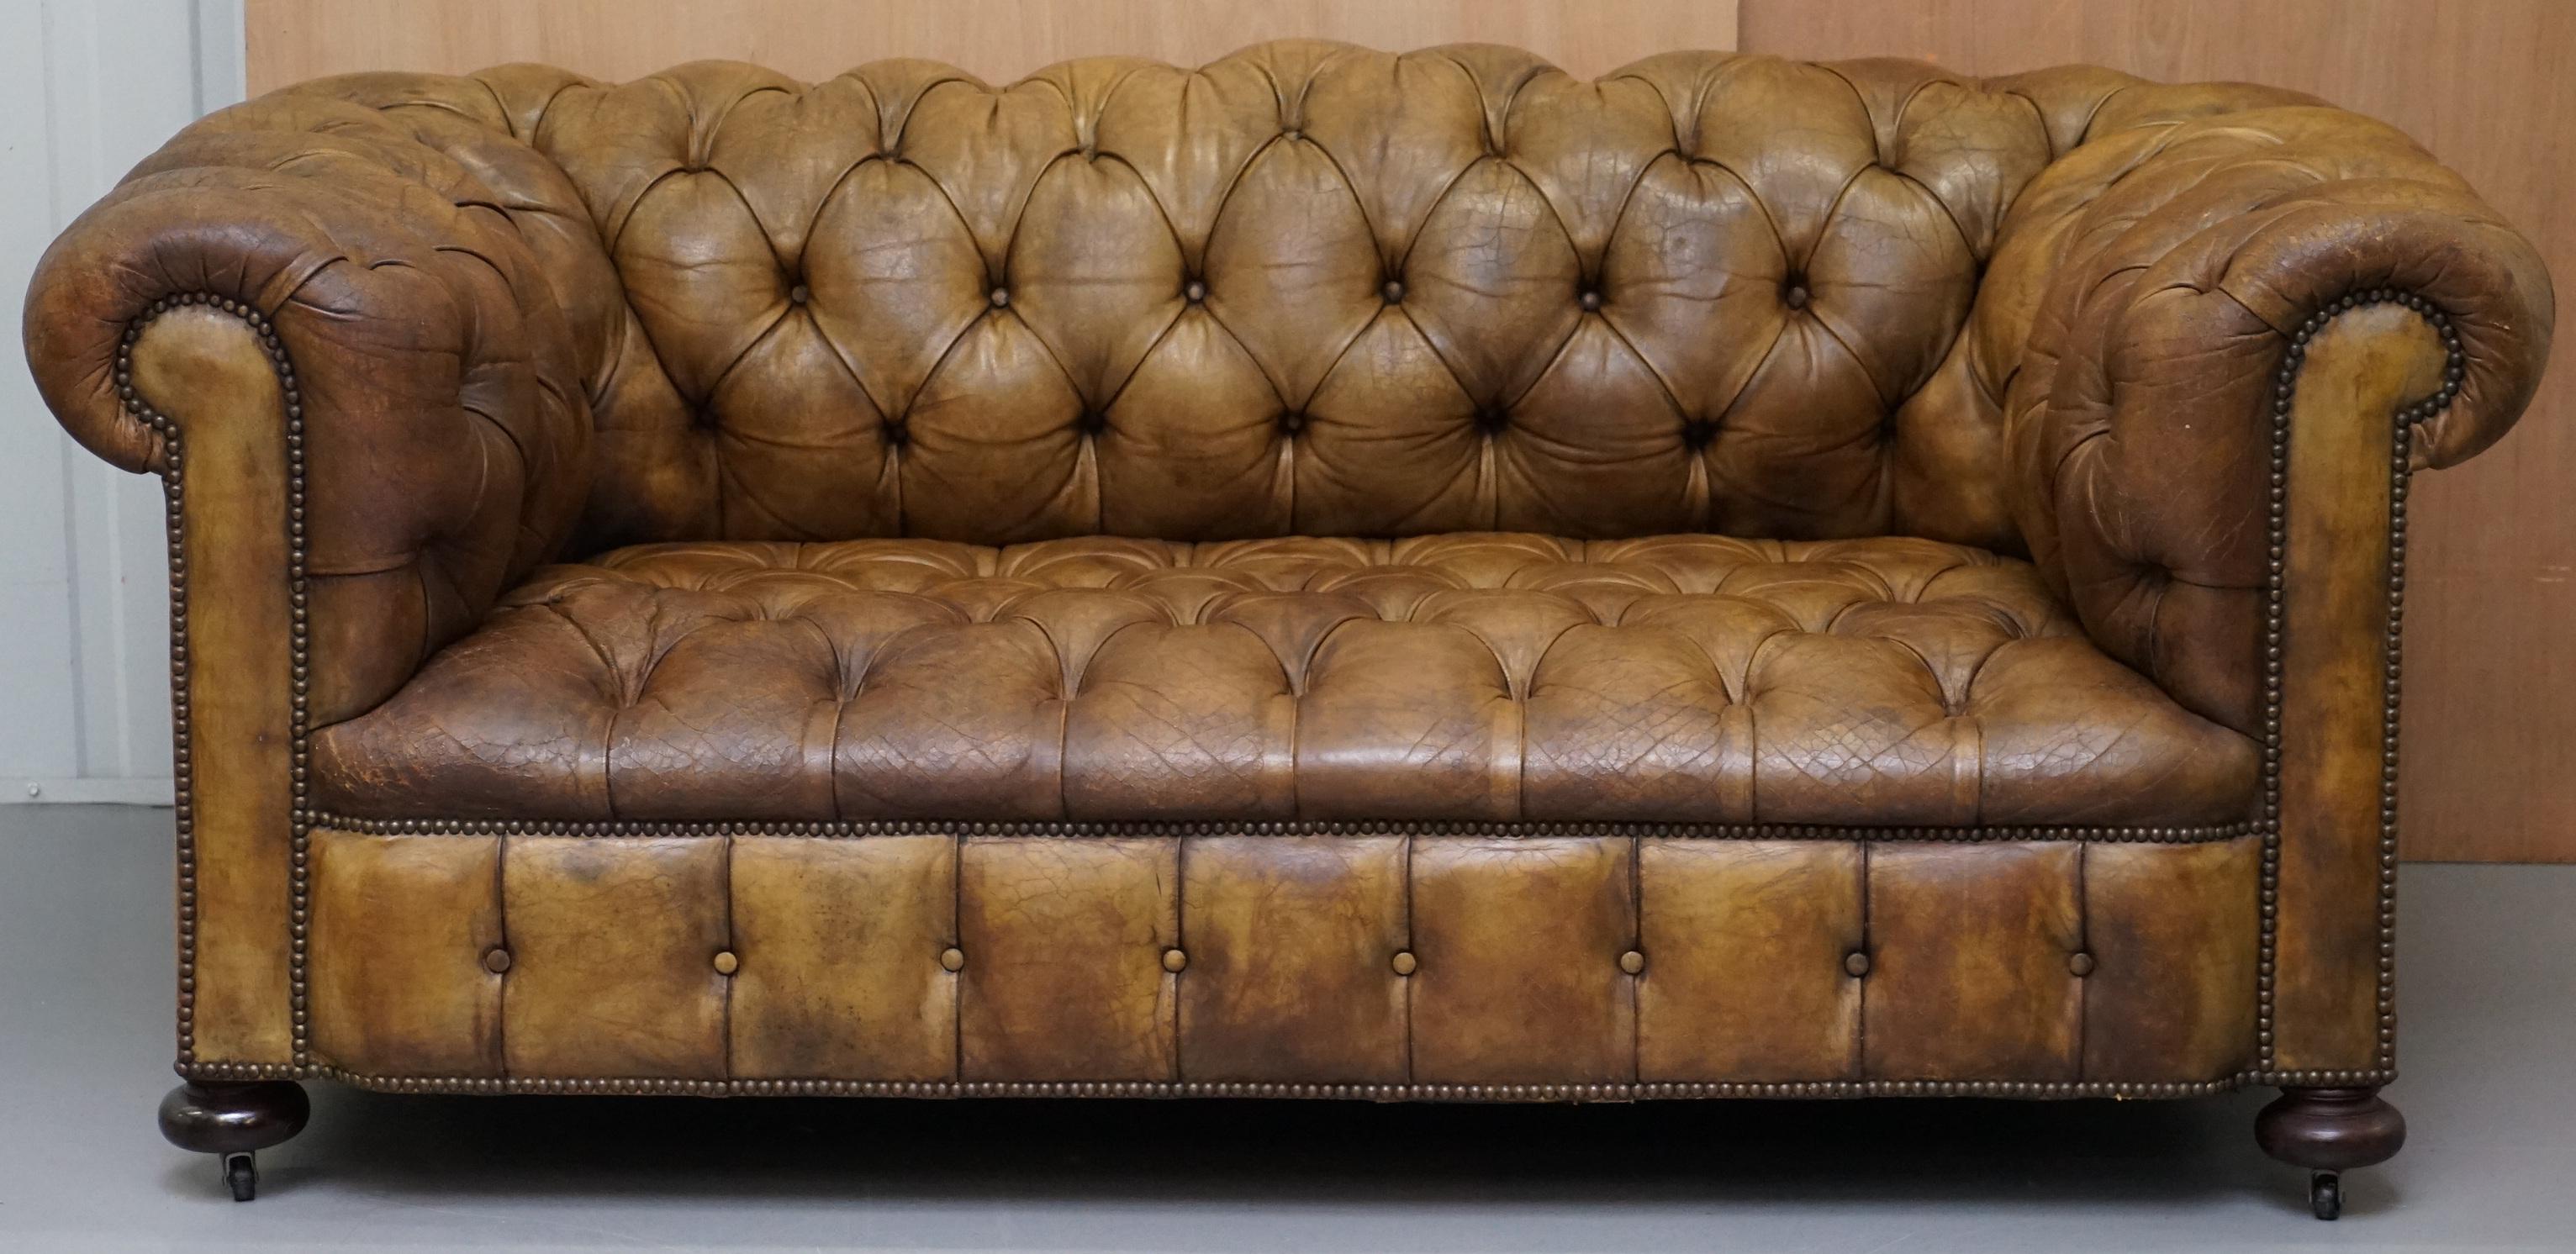 We are delighted to offer for sale this very rare quite rare fully buttoned Chesterfield club sofa with original leather upholstery

A very good looking and well made piece, the leather upholstery has that perfect patination that everyone is